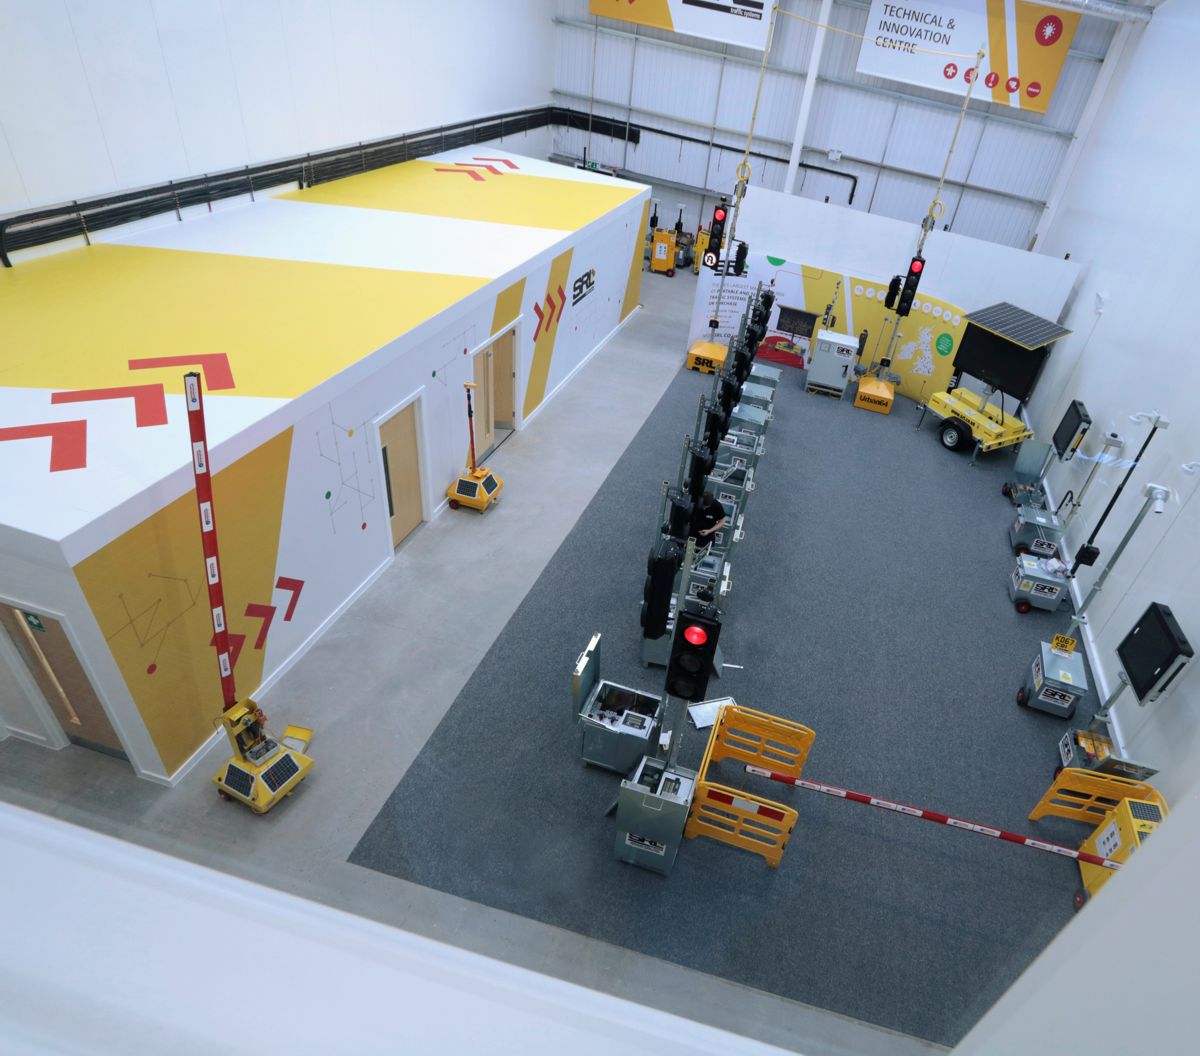 SRL Traffic Systems launches new Technical and Innovation Centre